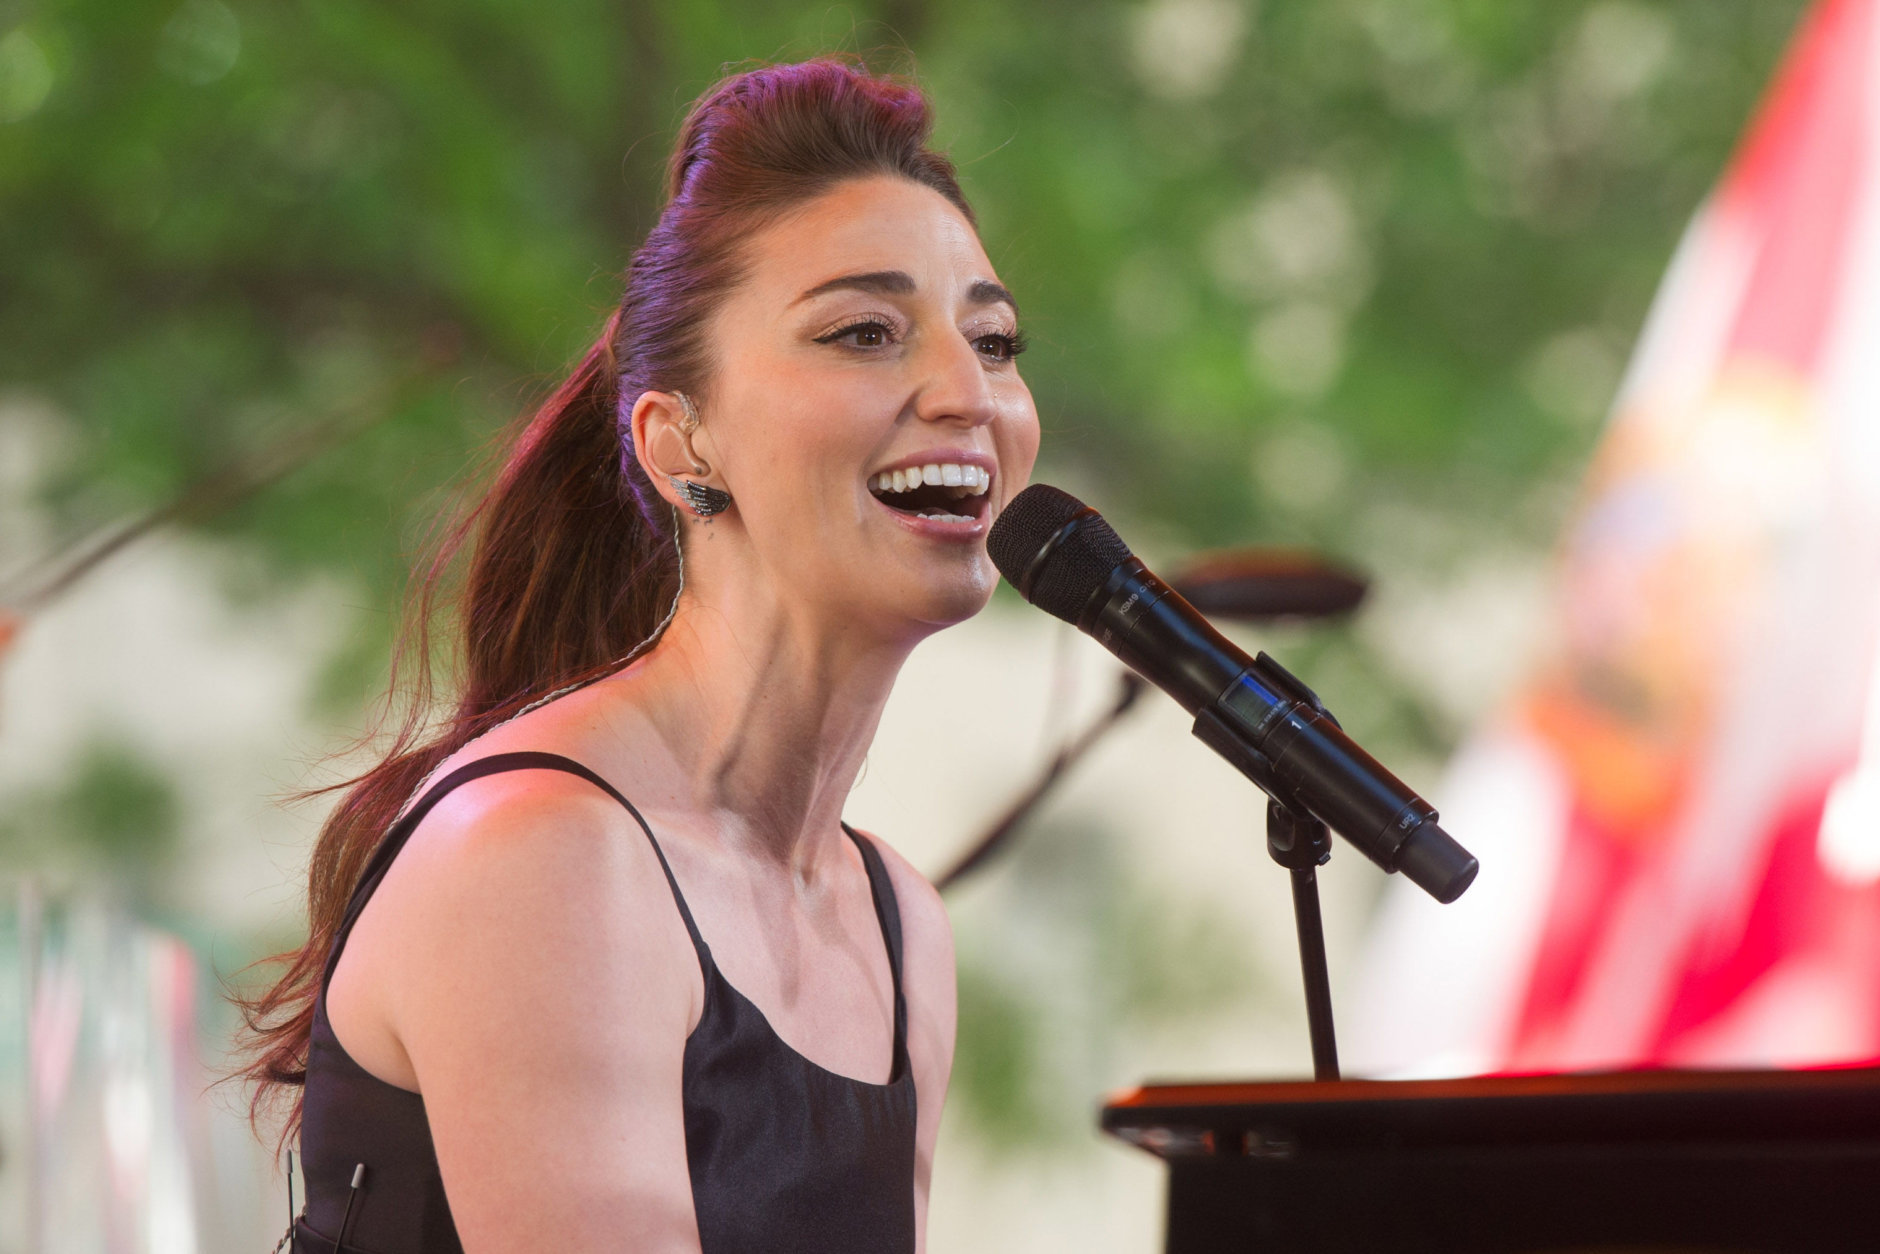 Sara Bareilles performs on NBC's "Today" show on Friday, June 6, 2014 in New York. (Photo by Charles Sykes/Invision/AP)